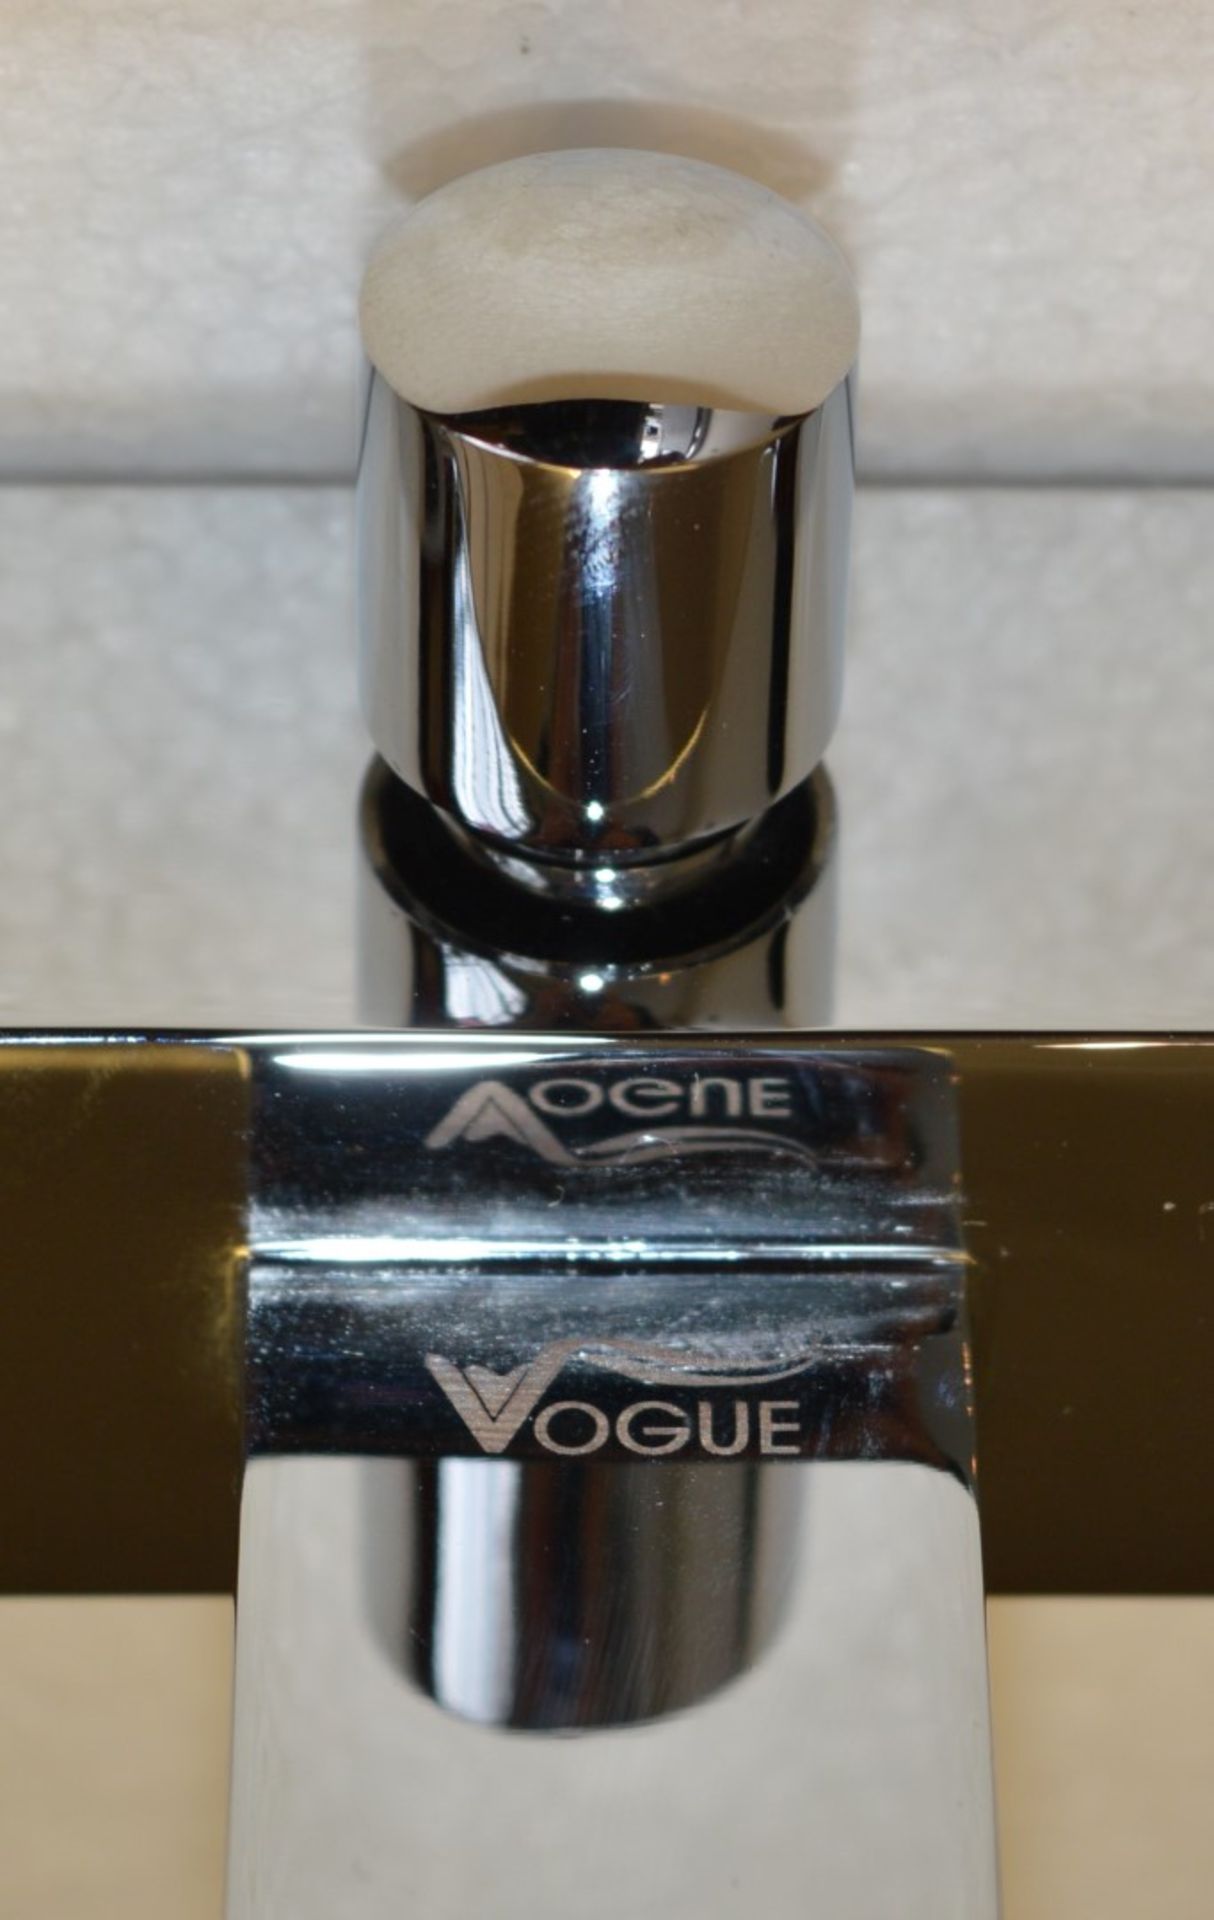 1 x Vogue Series 1 Bath Shower Mixer With Handset in Chrome - Modern Bath Mixer Tap in Bright Chrome - Image 7 of 10